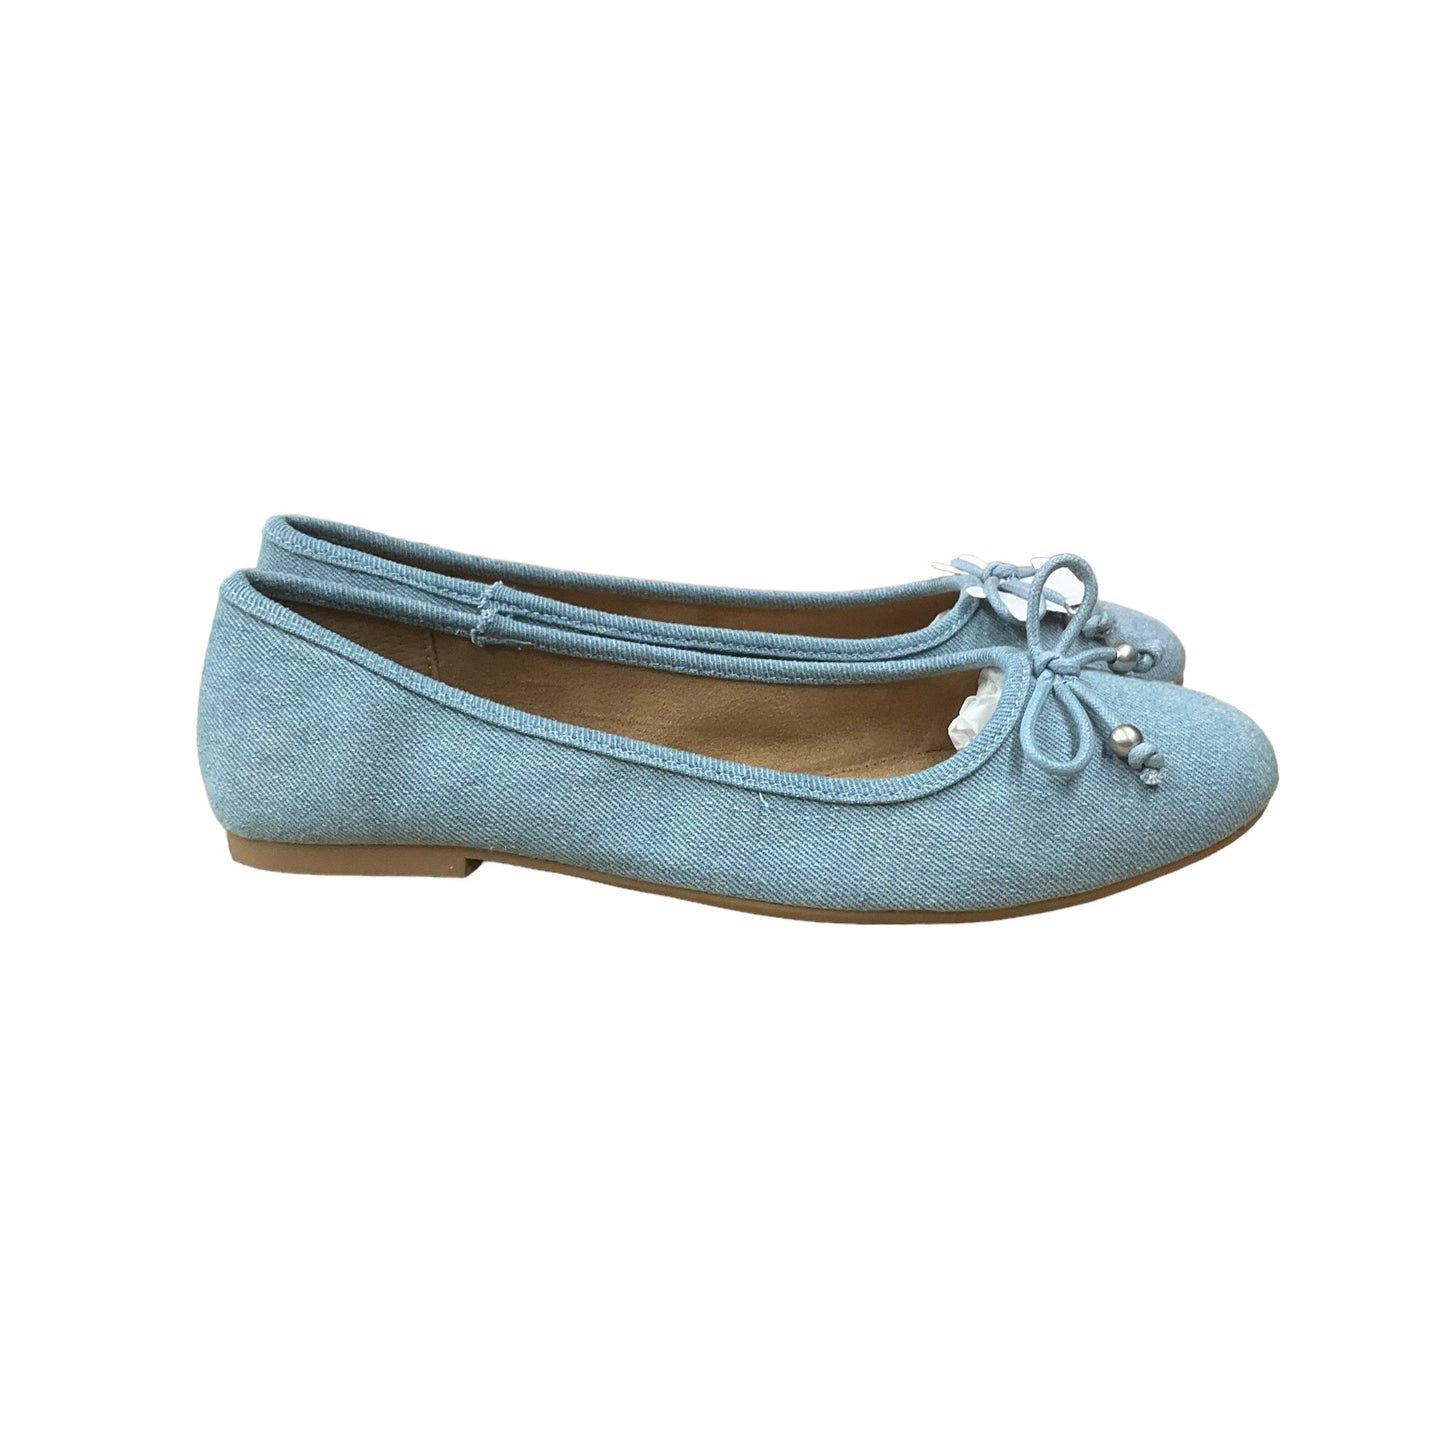 Blue Denim Shoes Flats Style And Company, Size 9